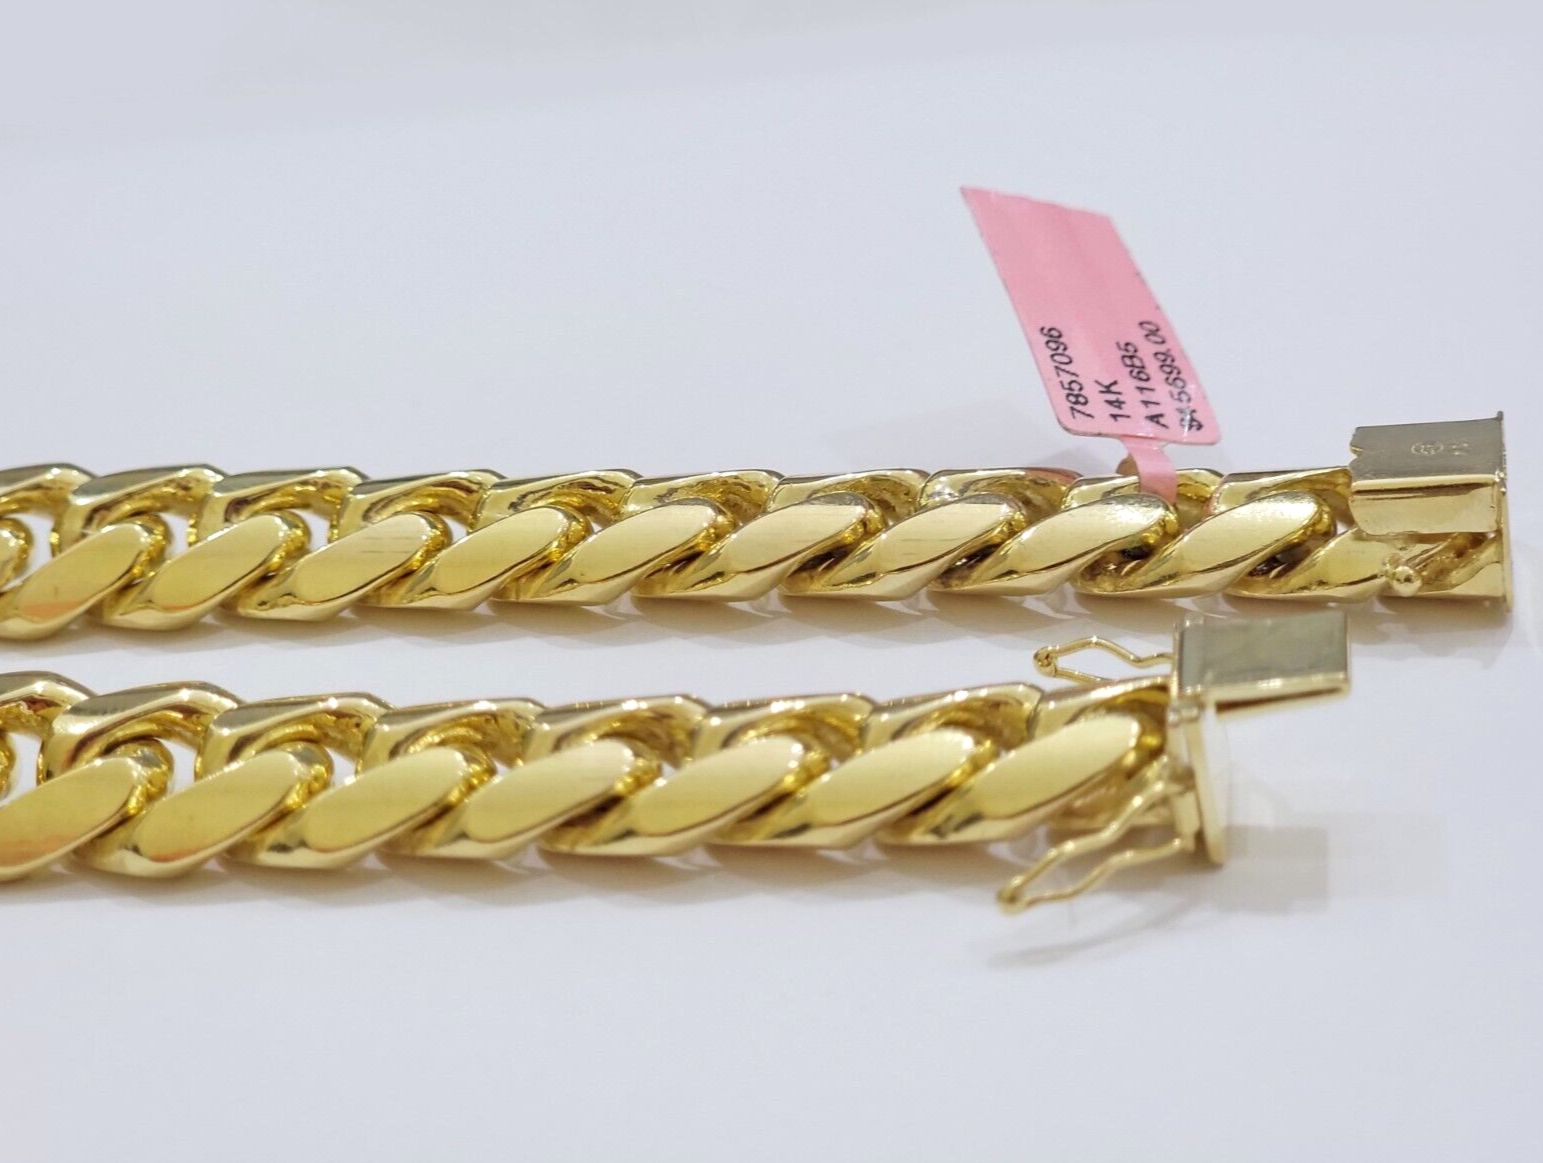 13mm Solid 14k Yellow Gold bracelet Miami Cuban Link 8 Inch Mens REAL 14kt HEAVY